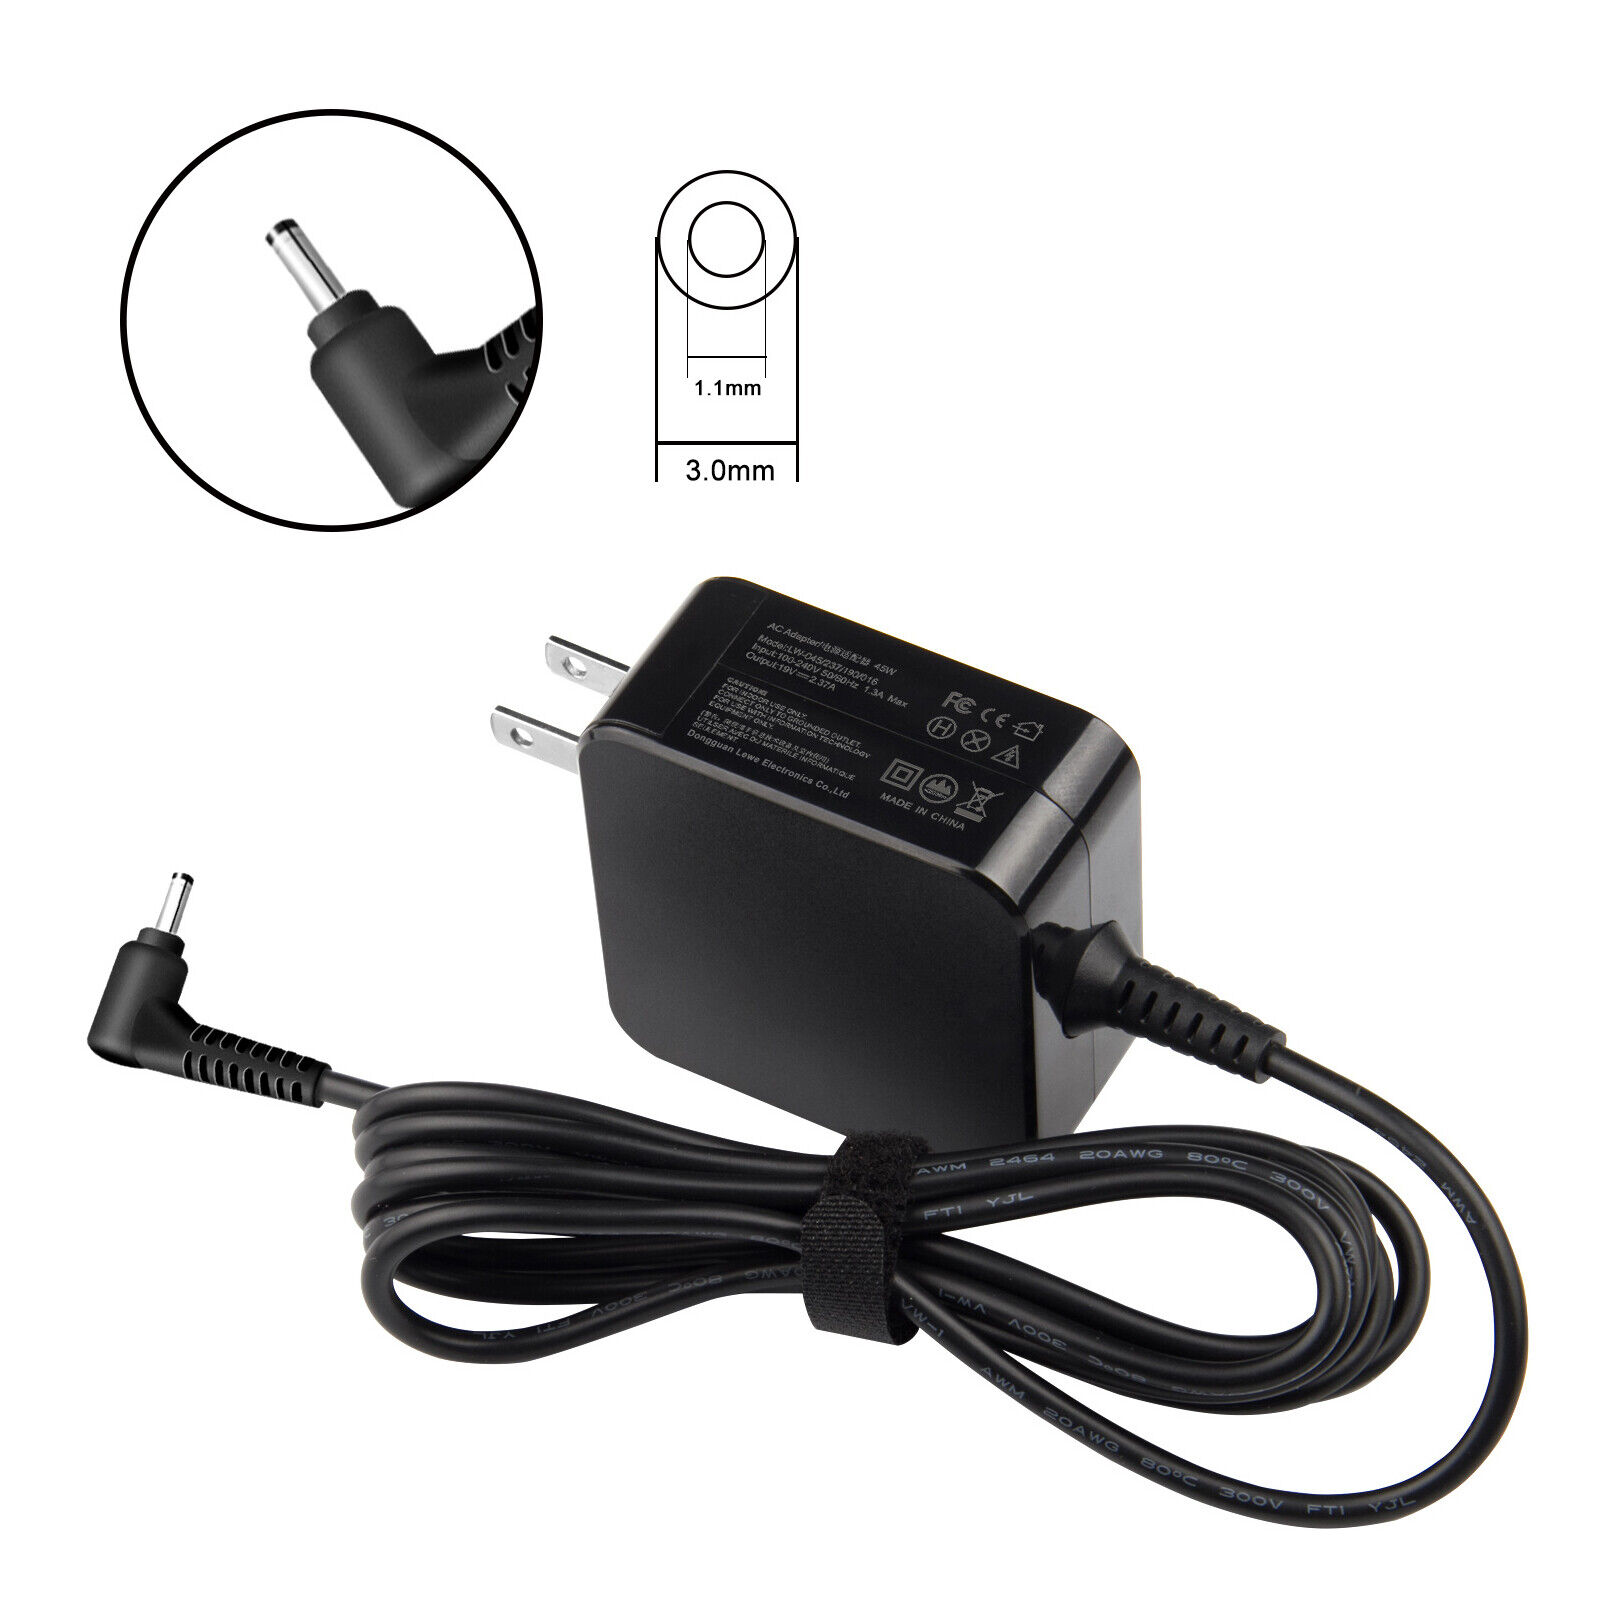 19V 2.37A 45W Laptop Replacement Power Adapter Charger For Acer Aspire 3.0*1.1mm